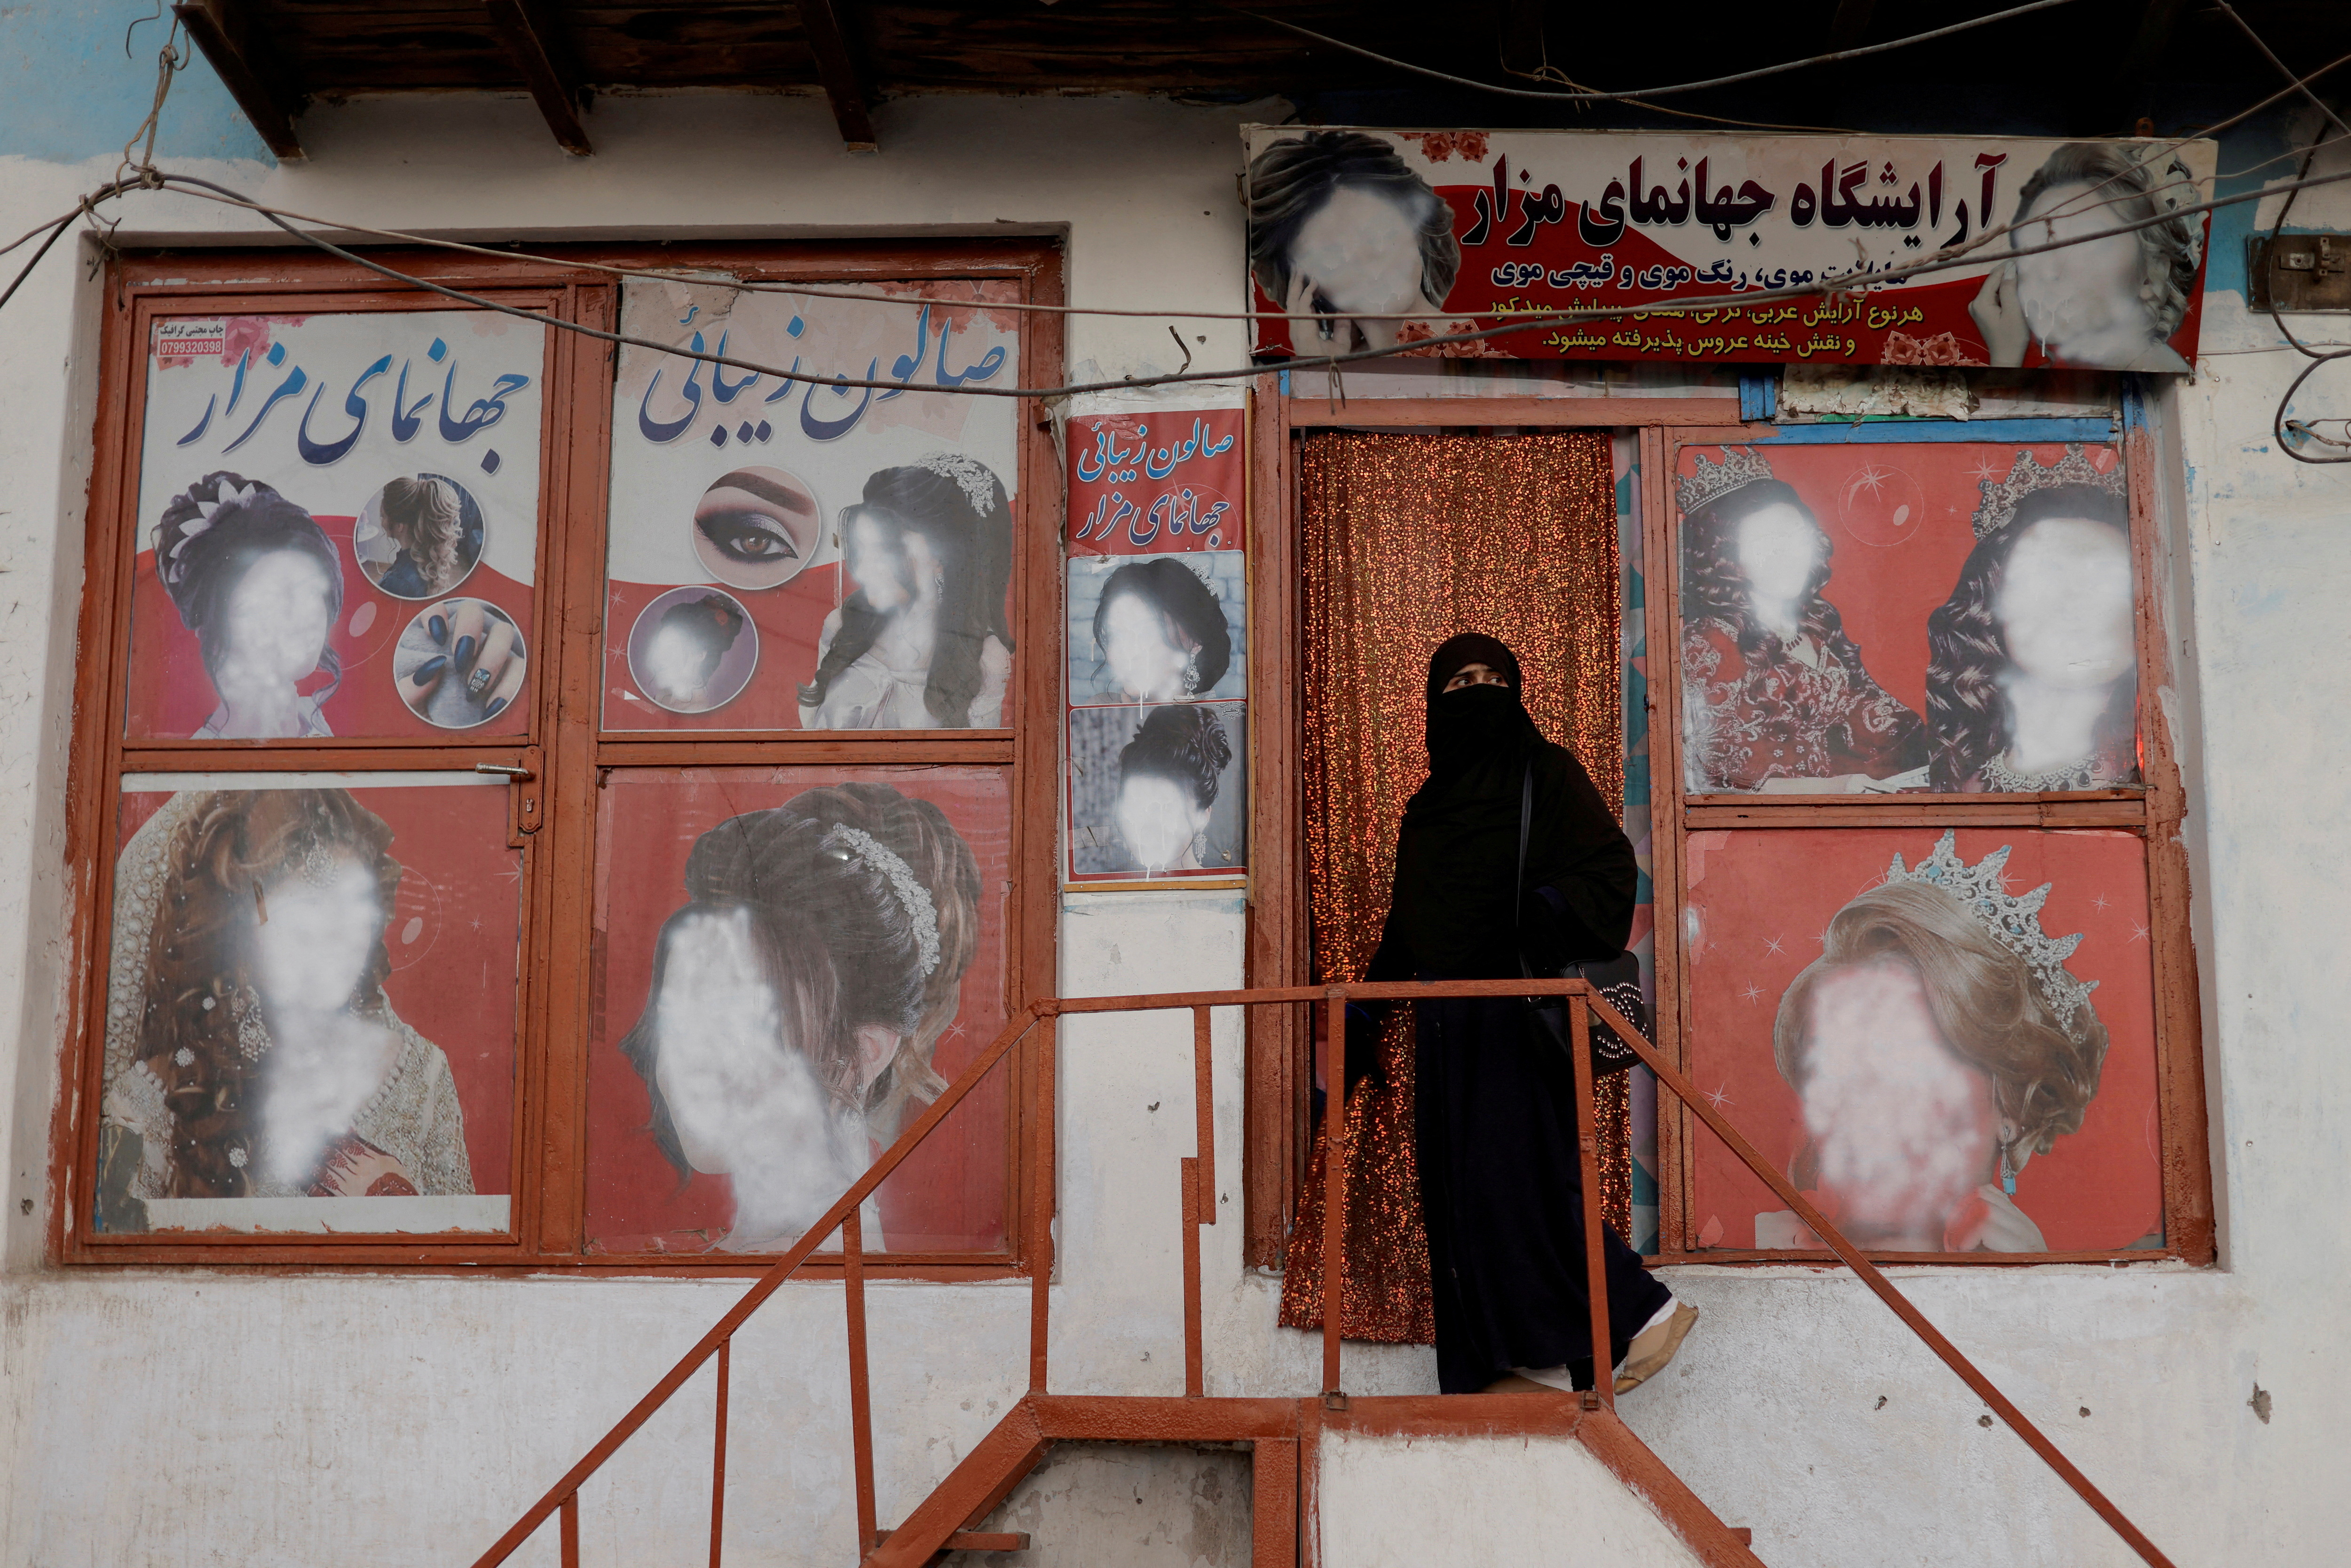 Taliban administration orders beauty salons in Afghanistan to close | Reuters